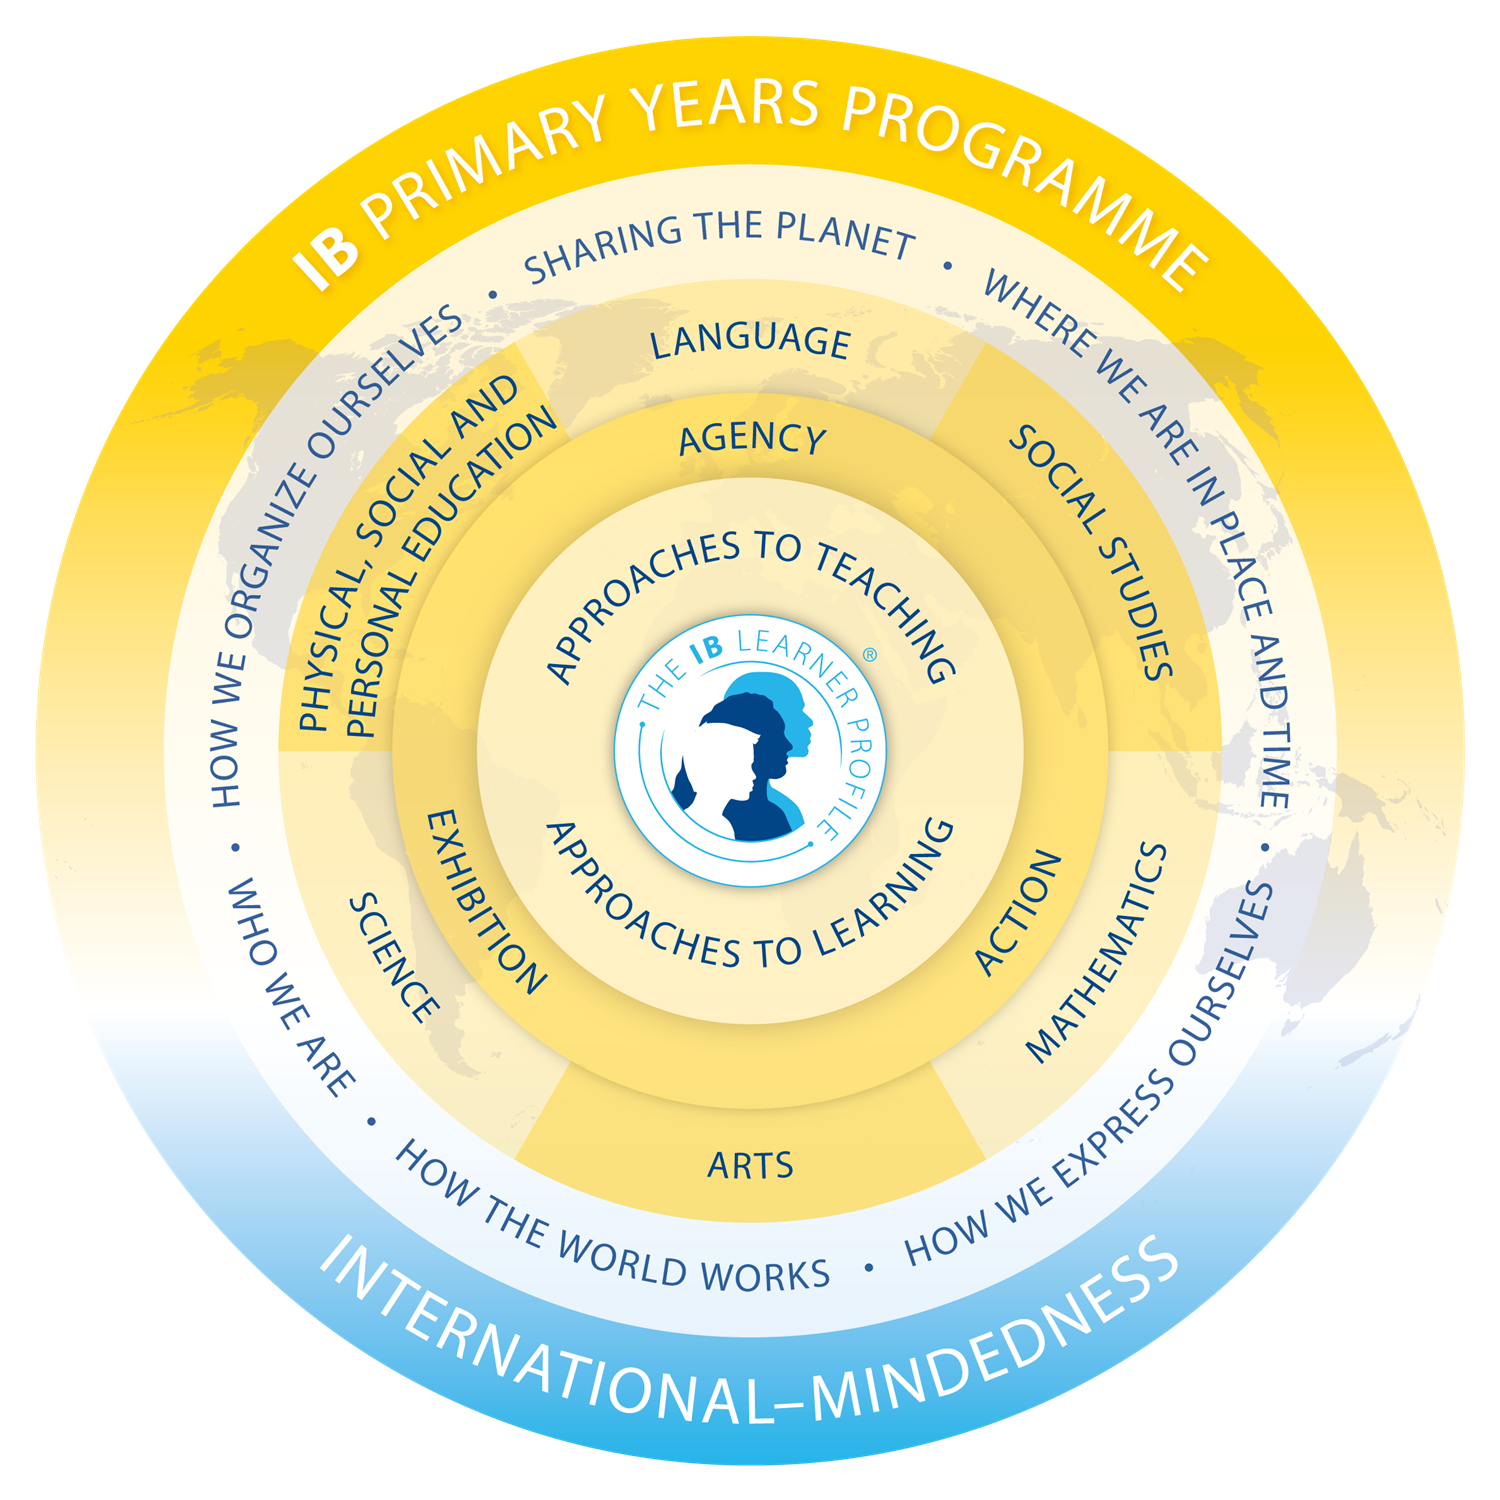 The Ib Primary Years Programme Model